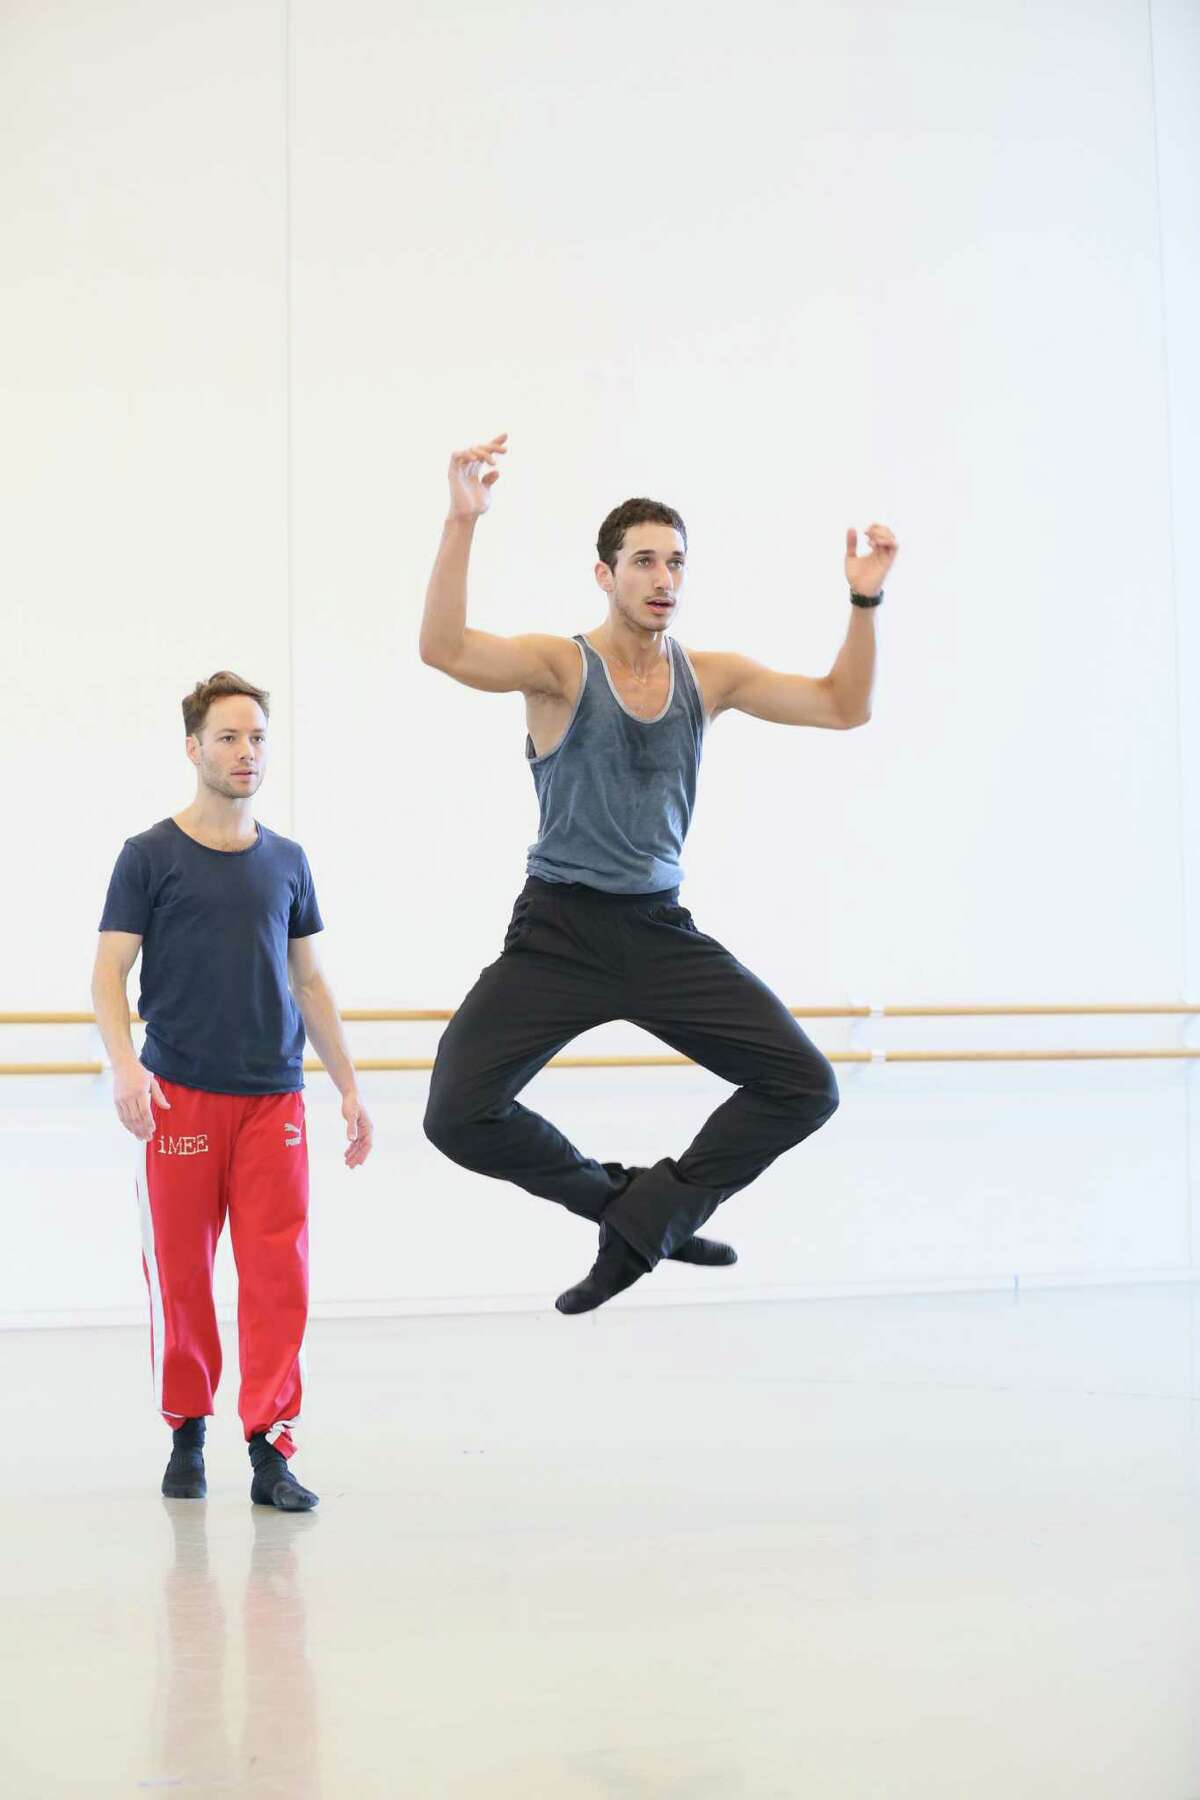 Oliver Halkowich, rear, rehearses dancer Shahar Dori, one of three Houston Ballet company members who will perform in Halkowich's new choreography for Project REACH.